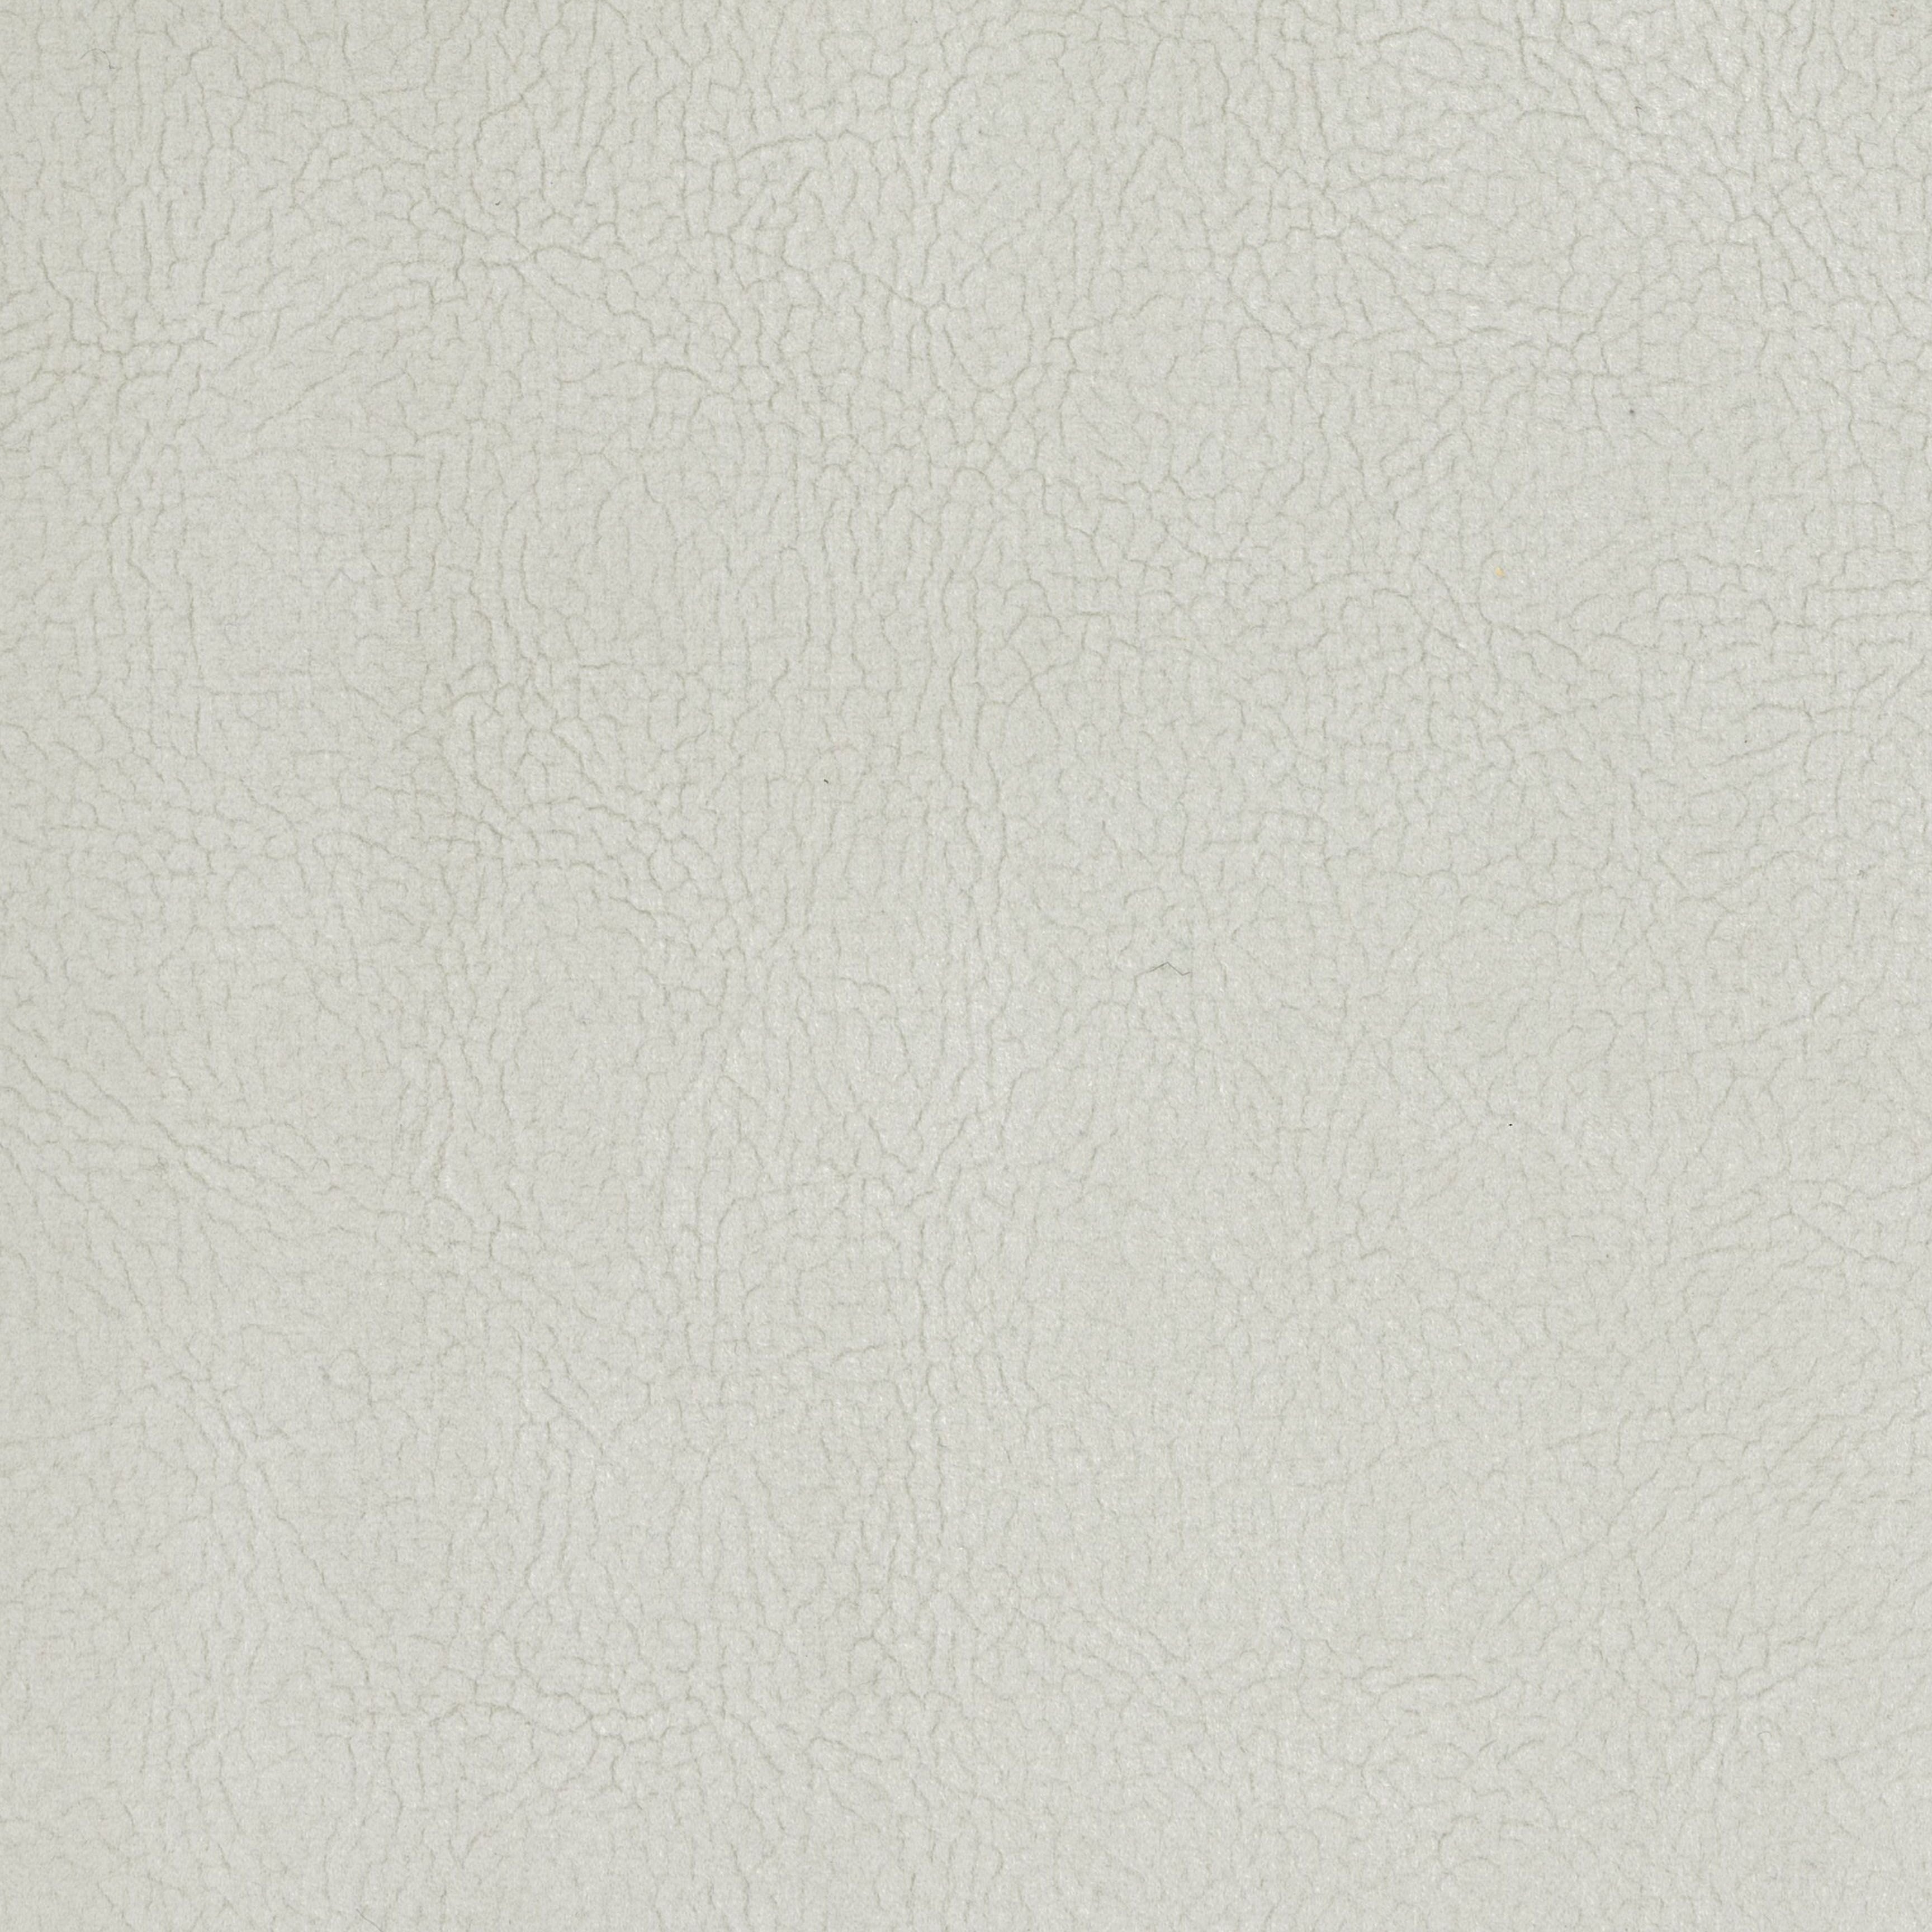 Georgia Suede fabric in gesso color - pattern number H6 37415937 - by Scalamandre in the Old World Weavers collection